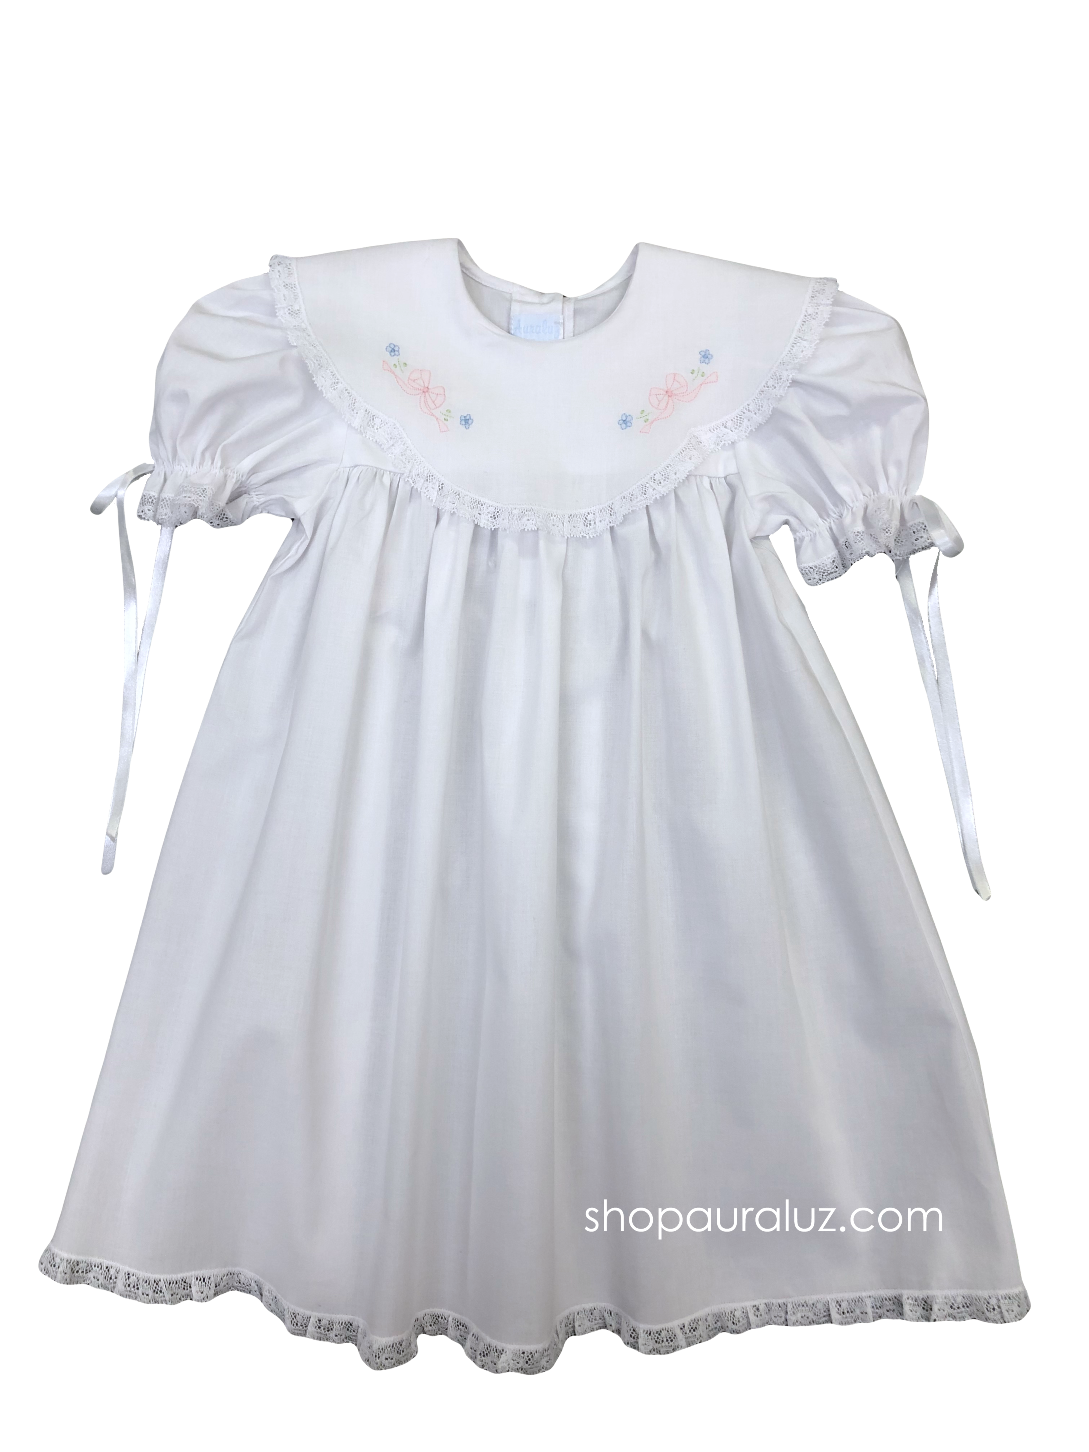 Auraluz Dress...White with white lace,scalloped round collar and embroidered bows